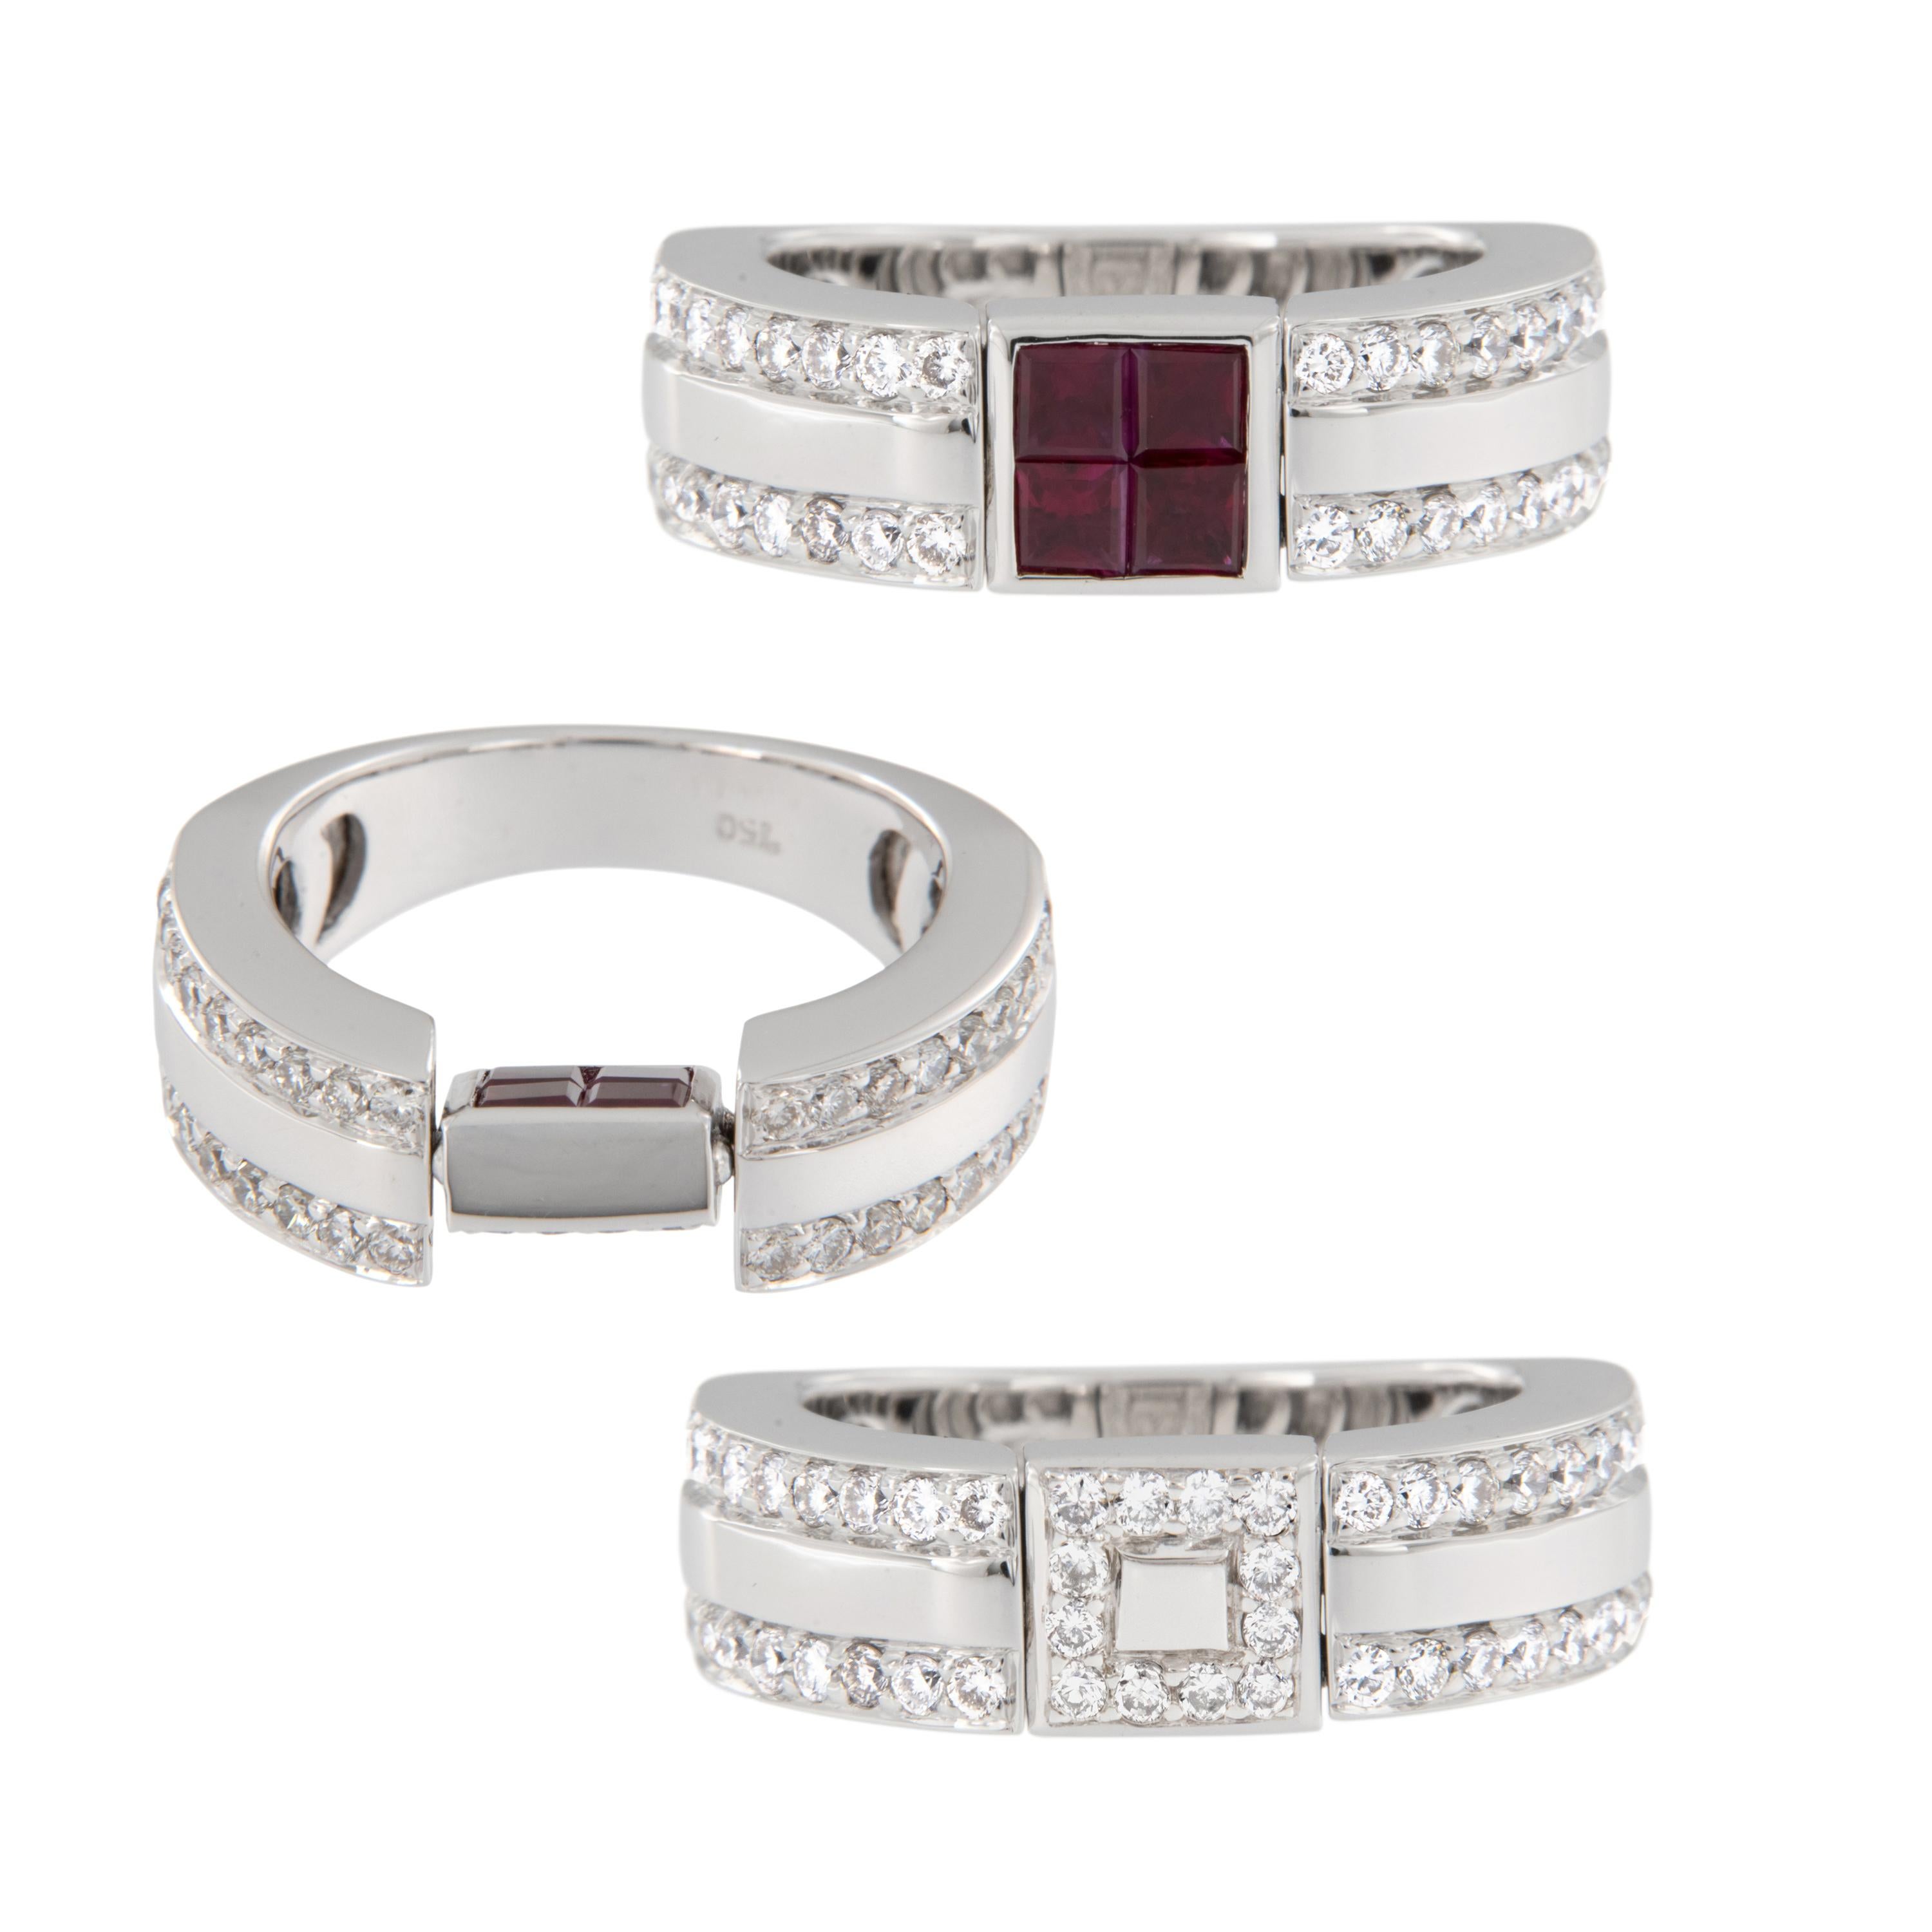 2 times the fun! Why settle for just 1 ring when you can get two for the same price? Made from 18 karat white gold this reversible ring with 0.71 Cttw diamonds & 4 rubies = 0.61 cttw comes in a size 6. Complimentary signature wrapping and